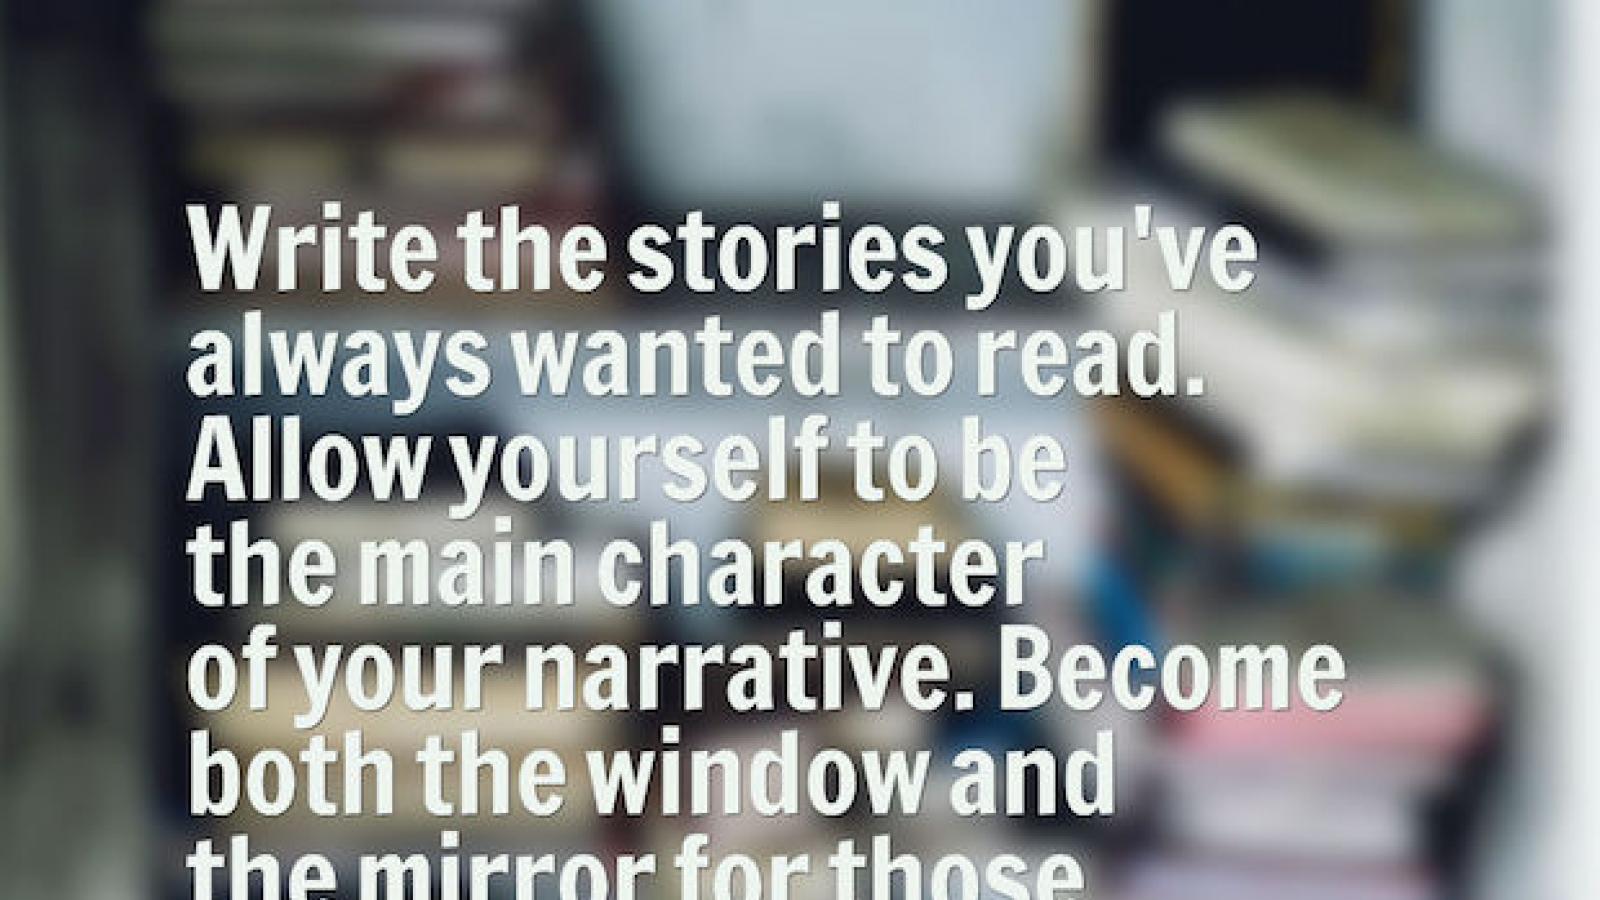 Quote by Elizabeth Acevedo: Write the stories you've always wanted to read. Allow yourself to be the main character.. Become both the window and the mirror for those who read your work. Lean into fear. Write the hard poem.